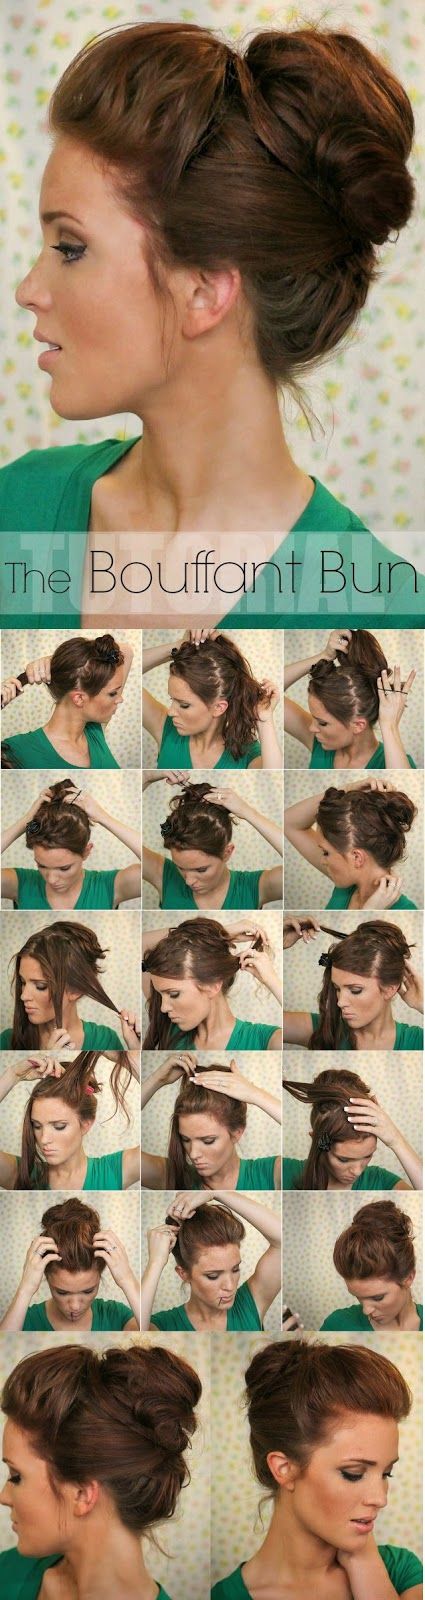 Bouffant Bun Hairstyle for Long Thick Hair